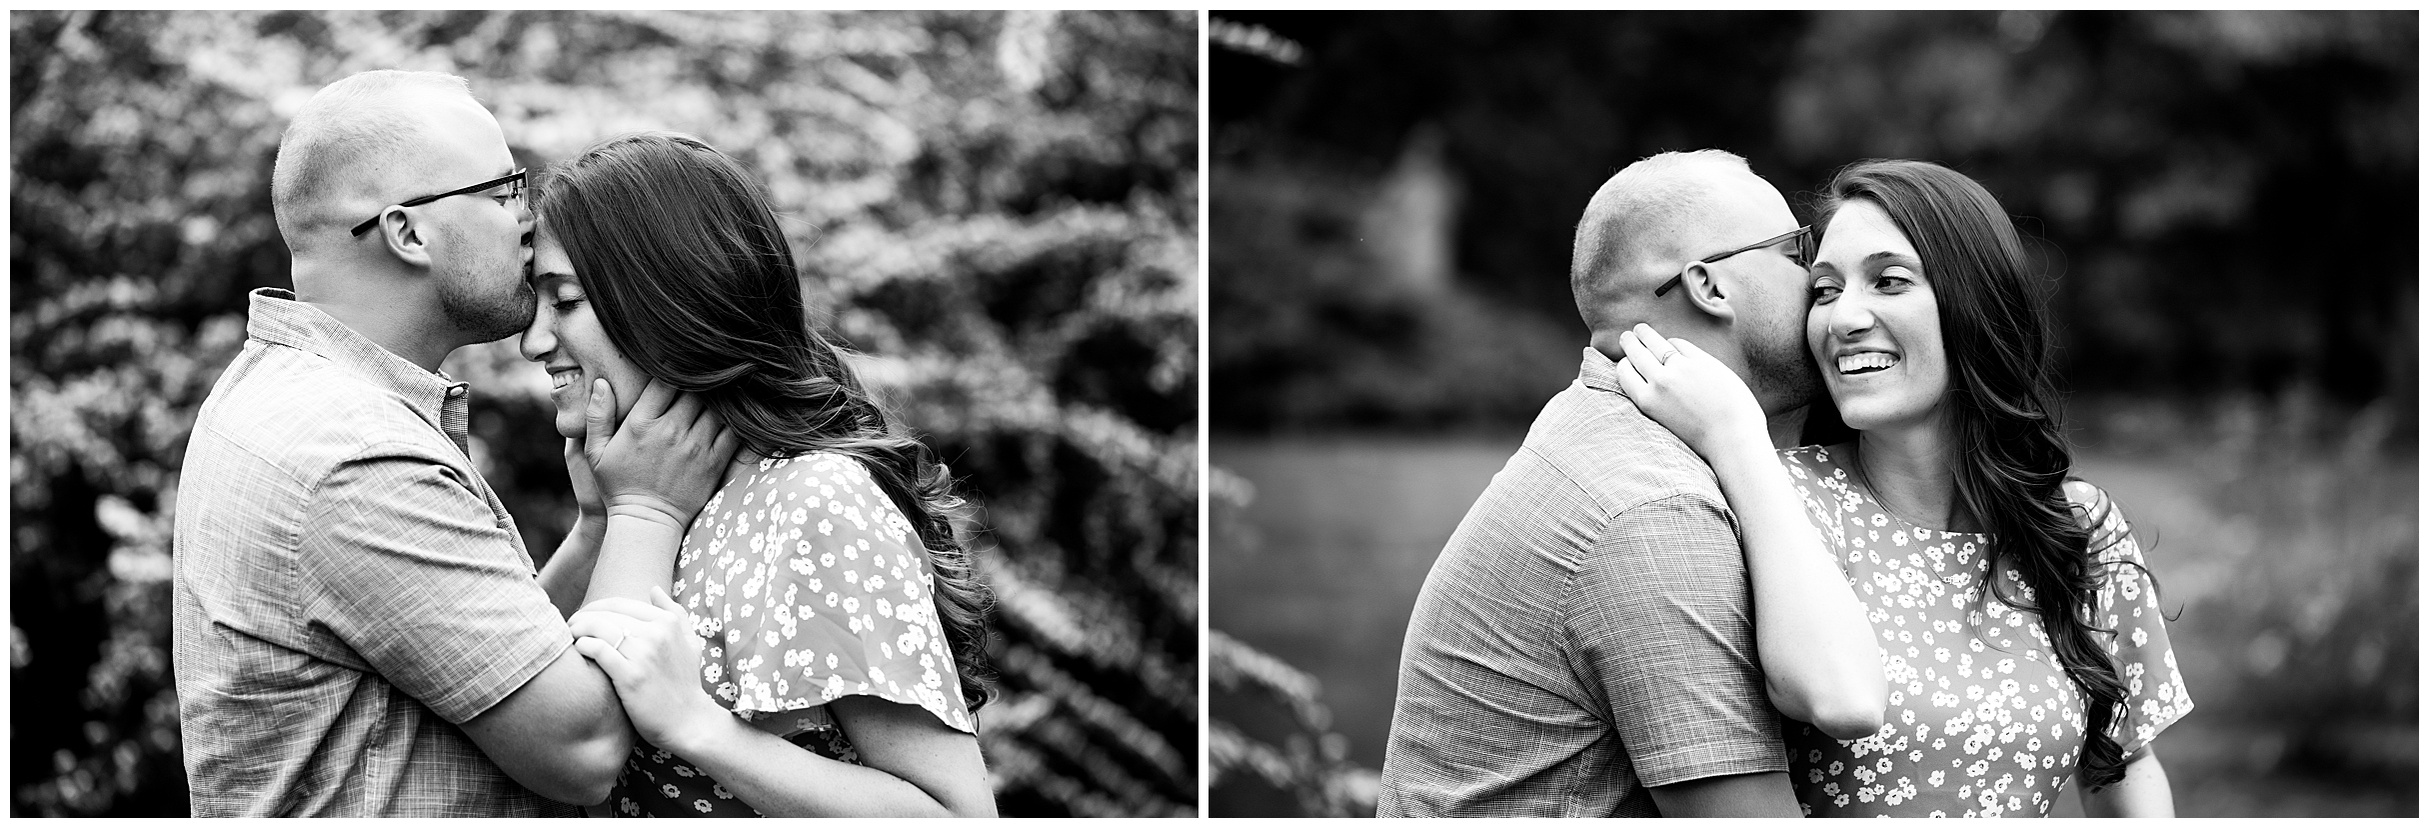 Millcreek Park Youngstown OH engagement session, Fellows Riverside Gardens engagement session, Engagement session Youngstown OH, Youngstown OH wedding photographer, Engagement photographer in Youngstown, Millcreek Park, Ohio wedding photographer